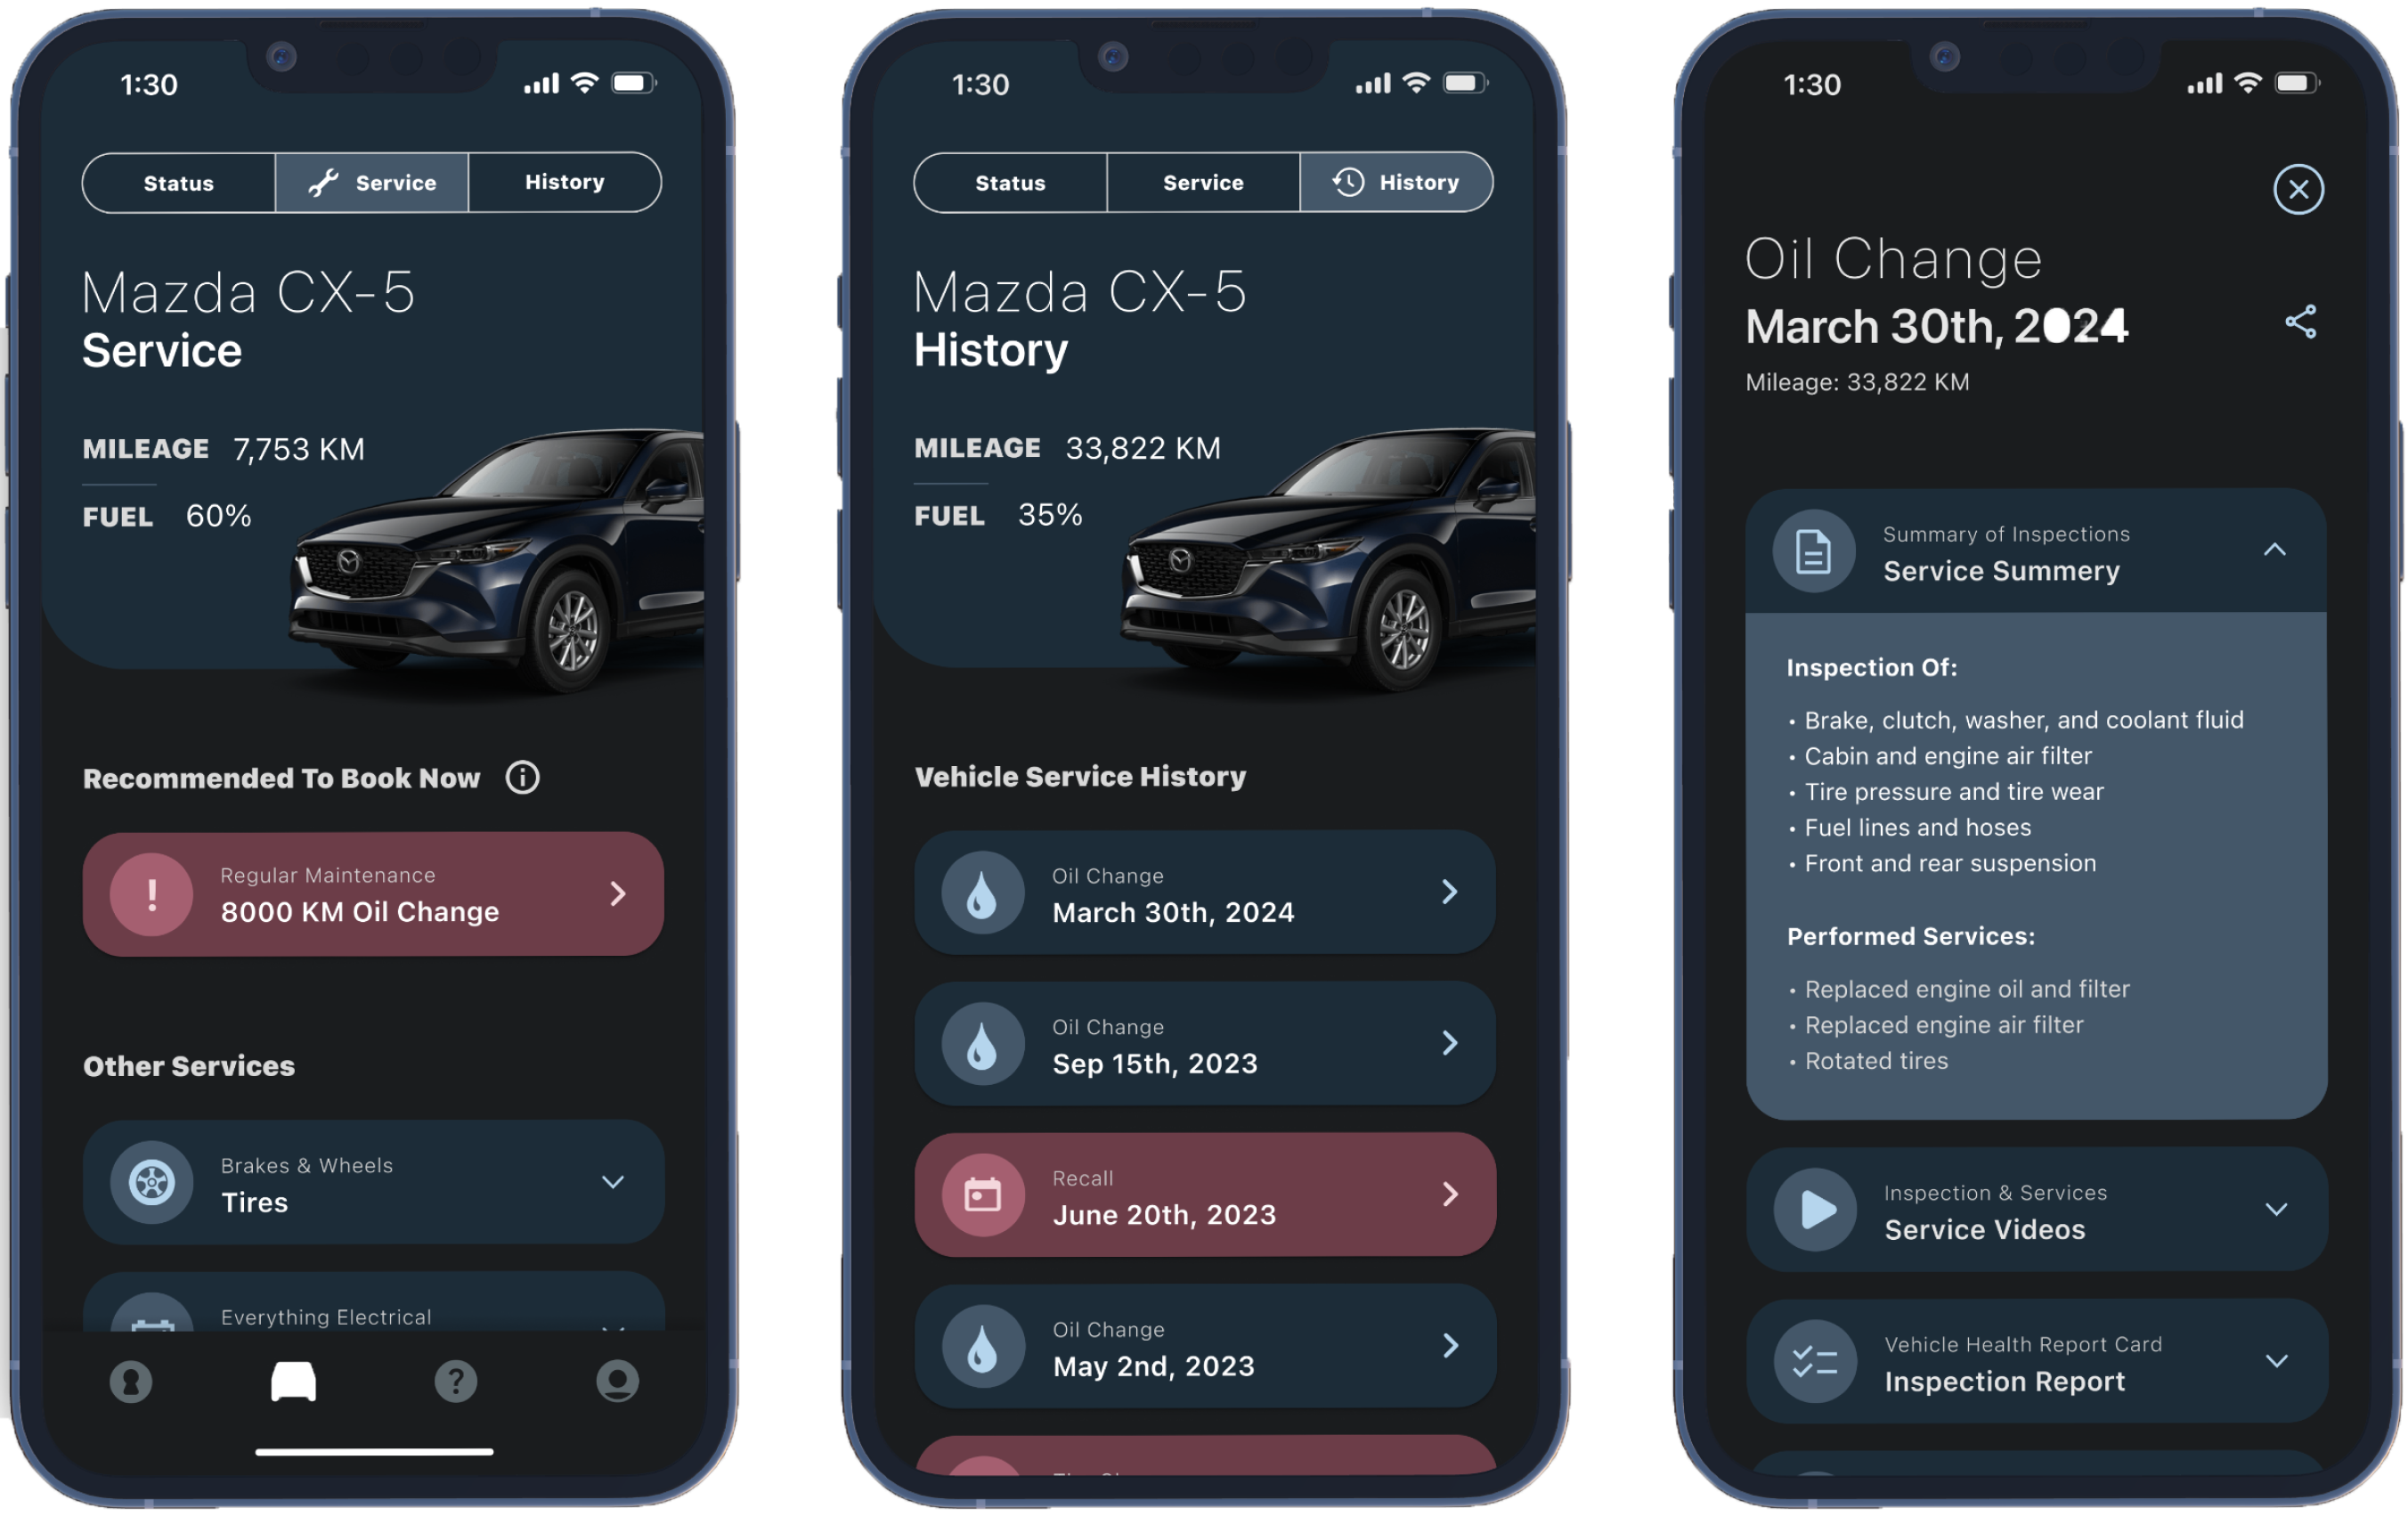 3 images of the current MyMazda App